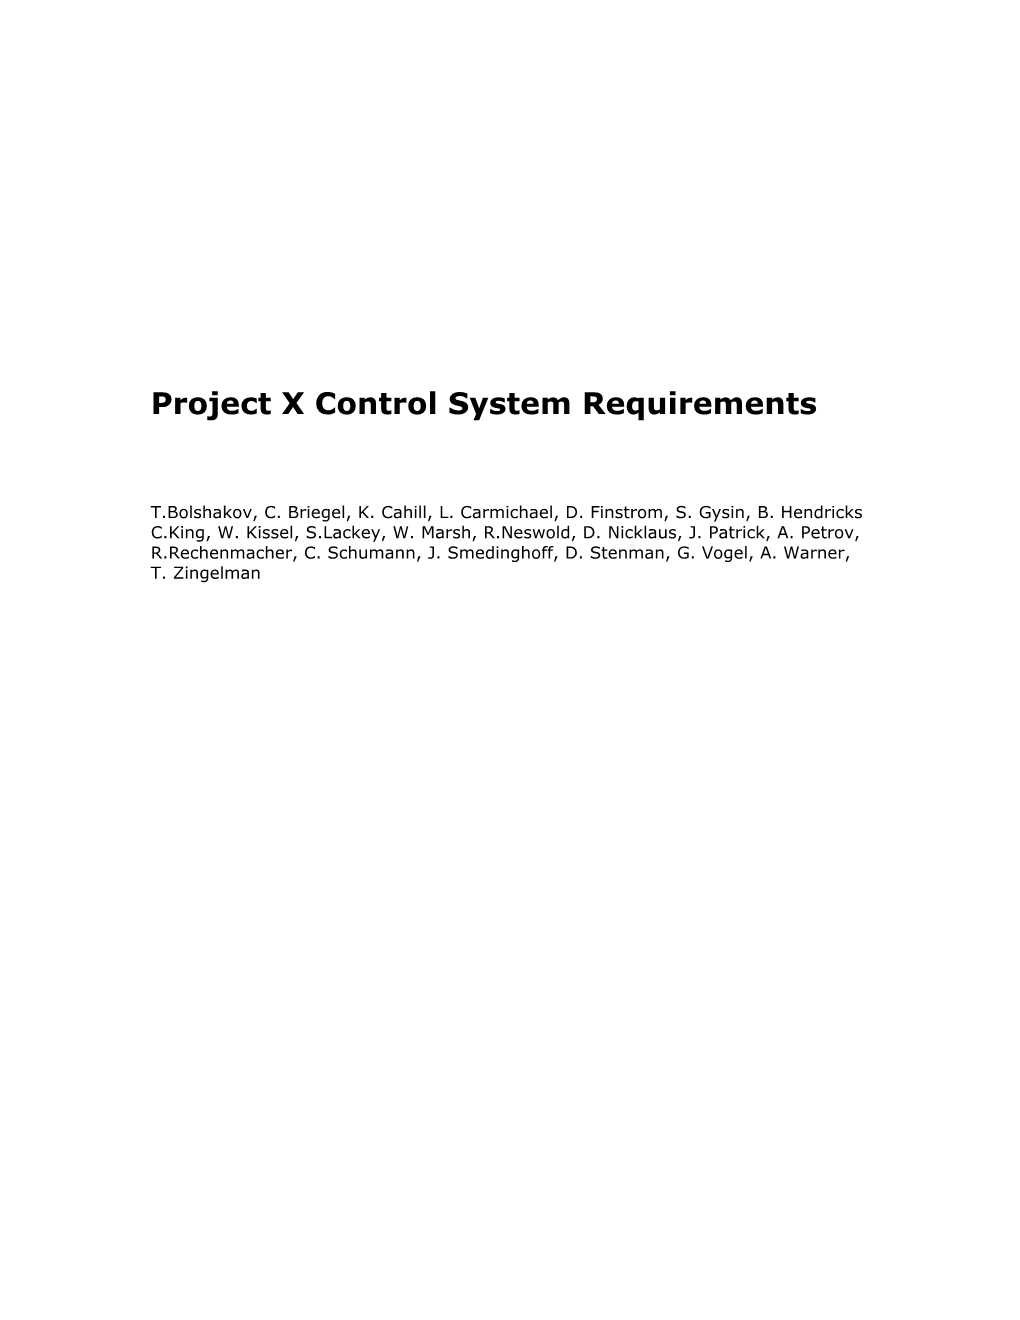 Control System Notes